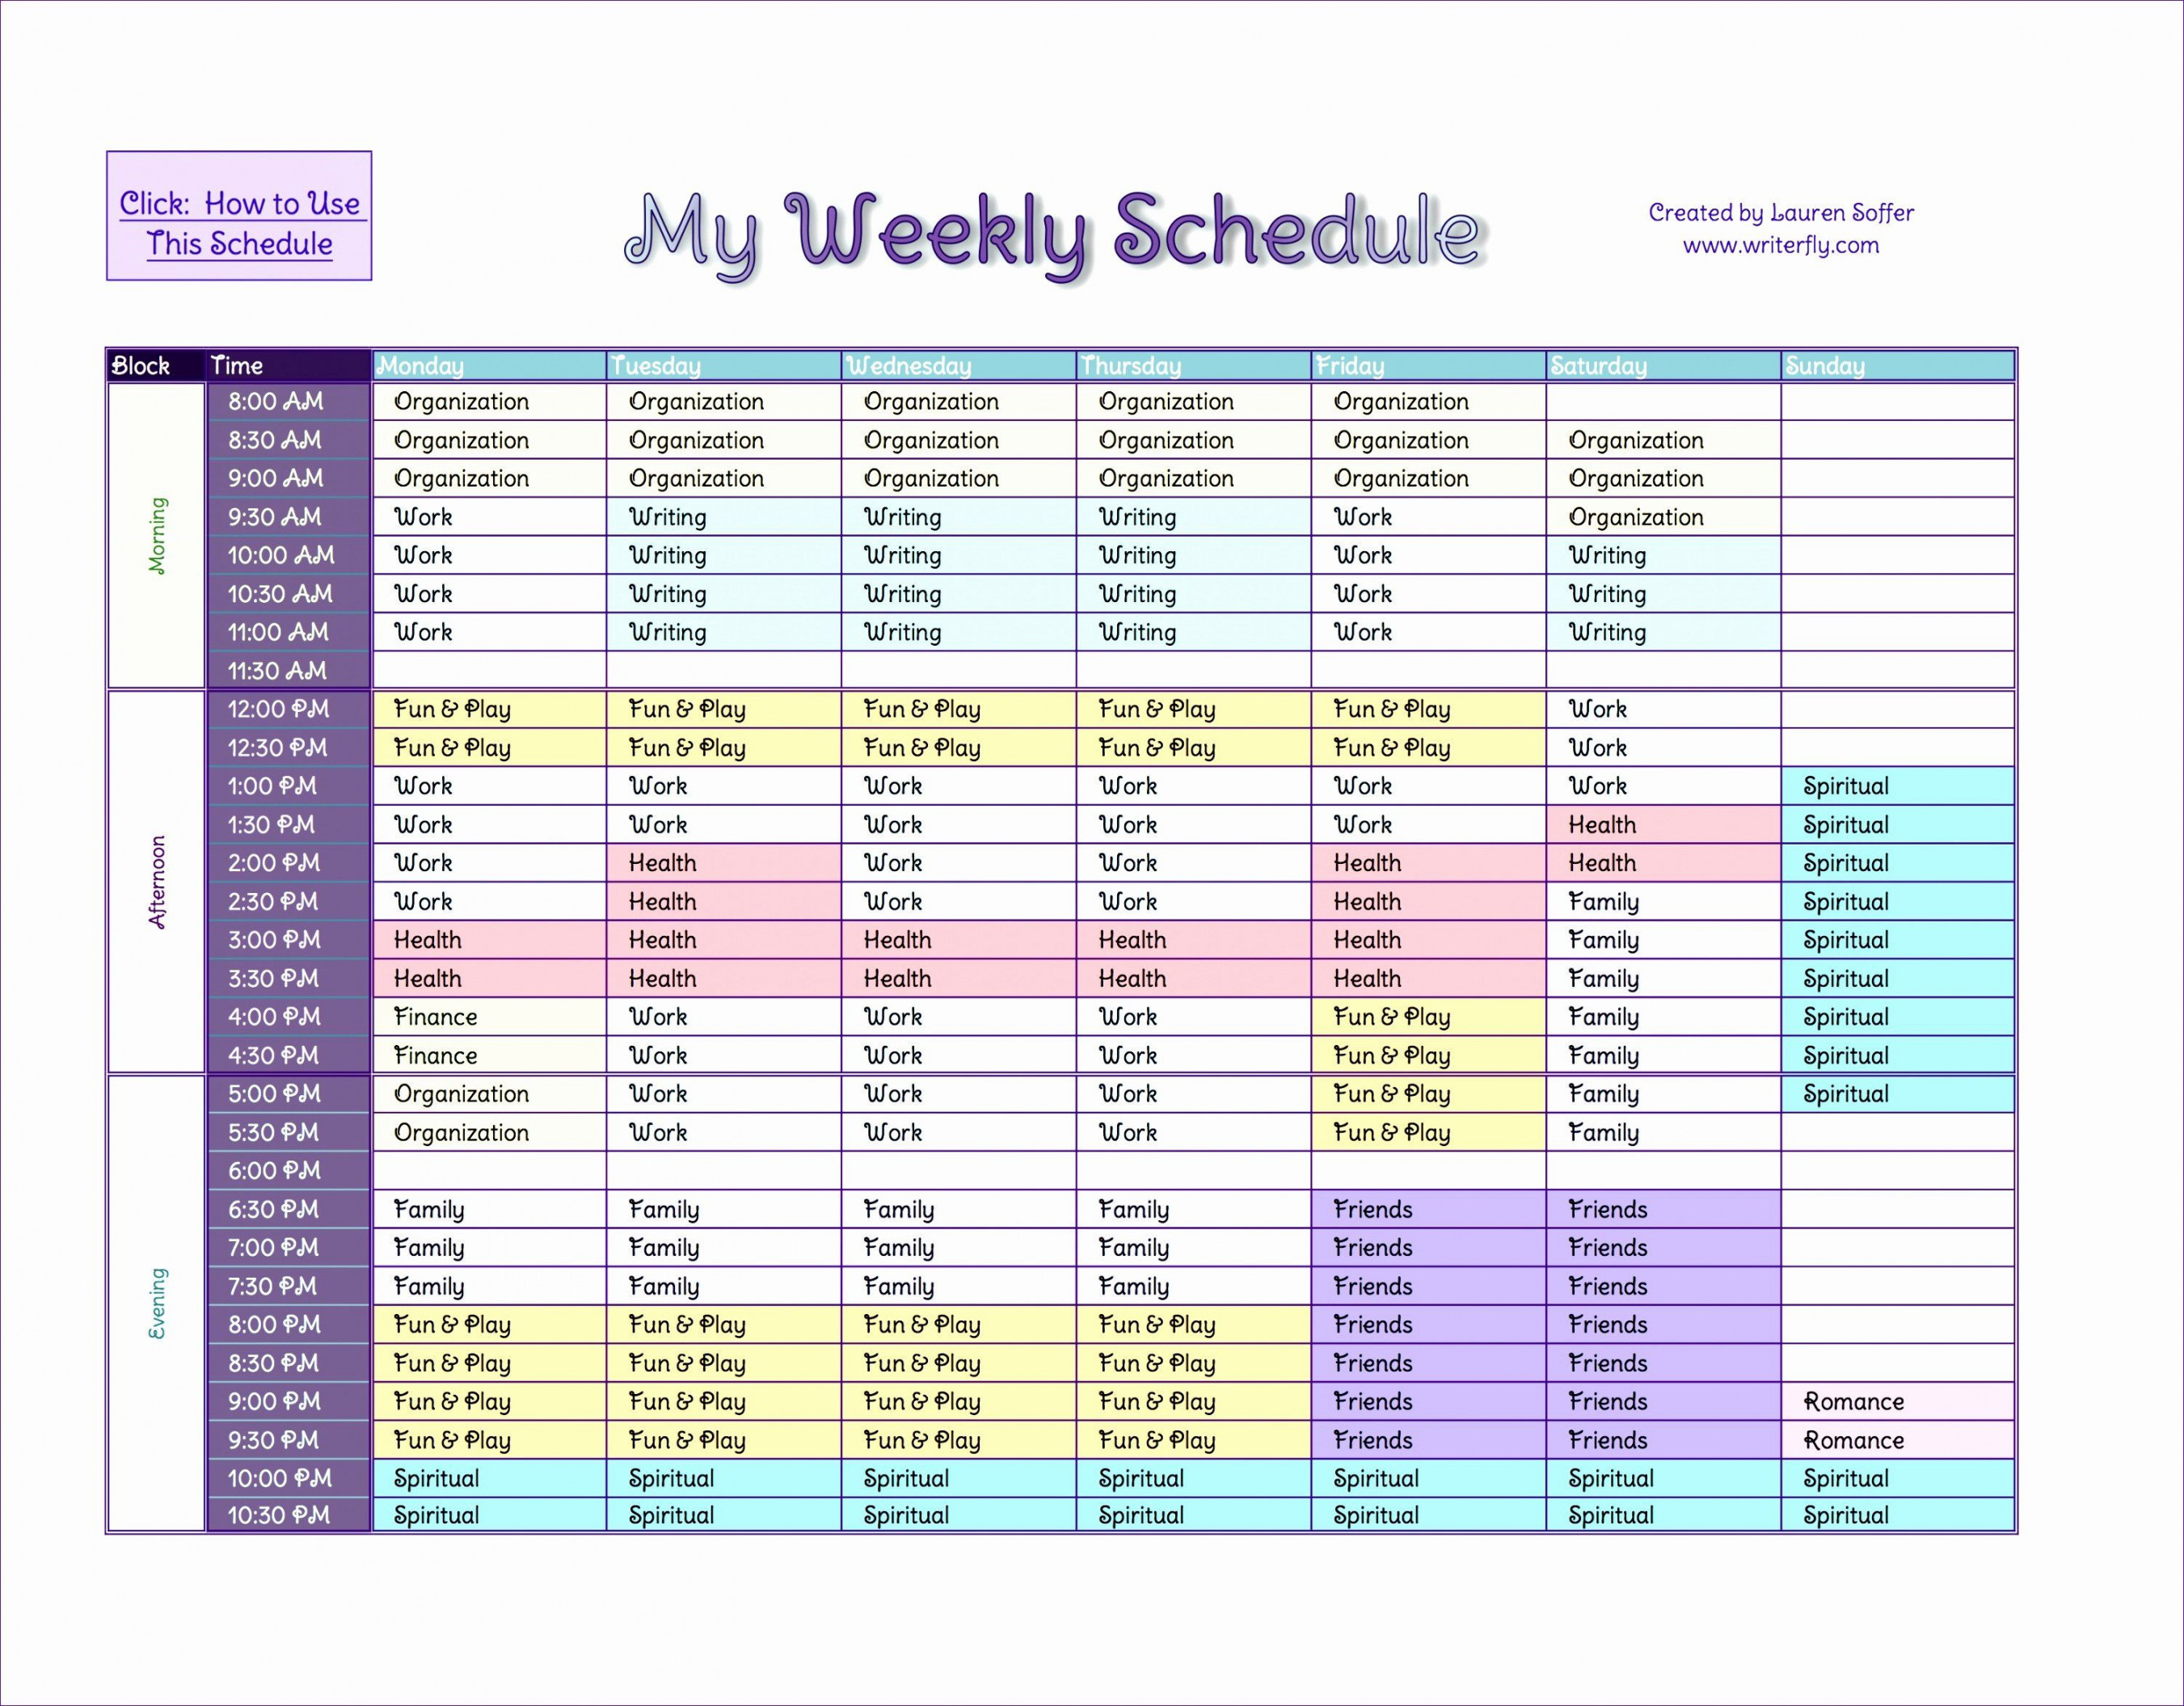 On Call Schedule Template New Call Schedule Template Excel Vtyho